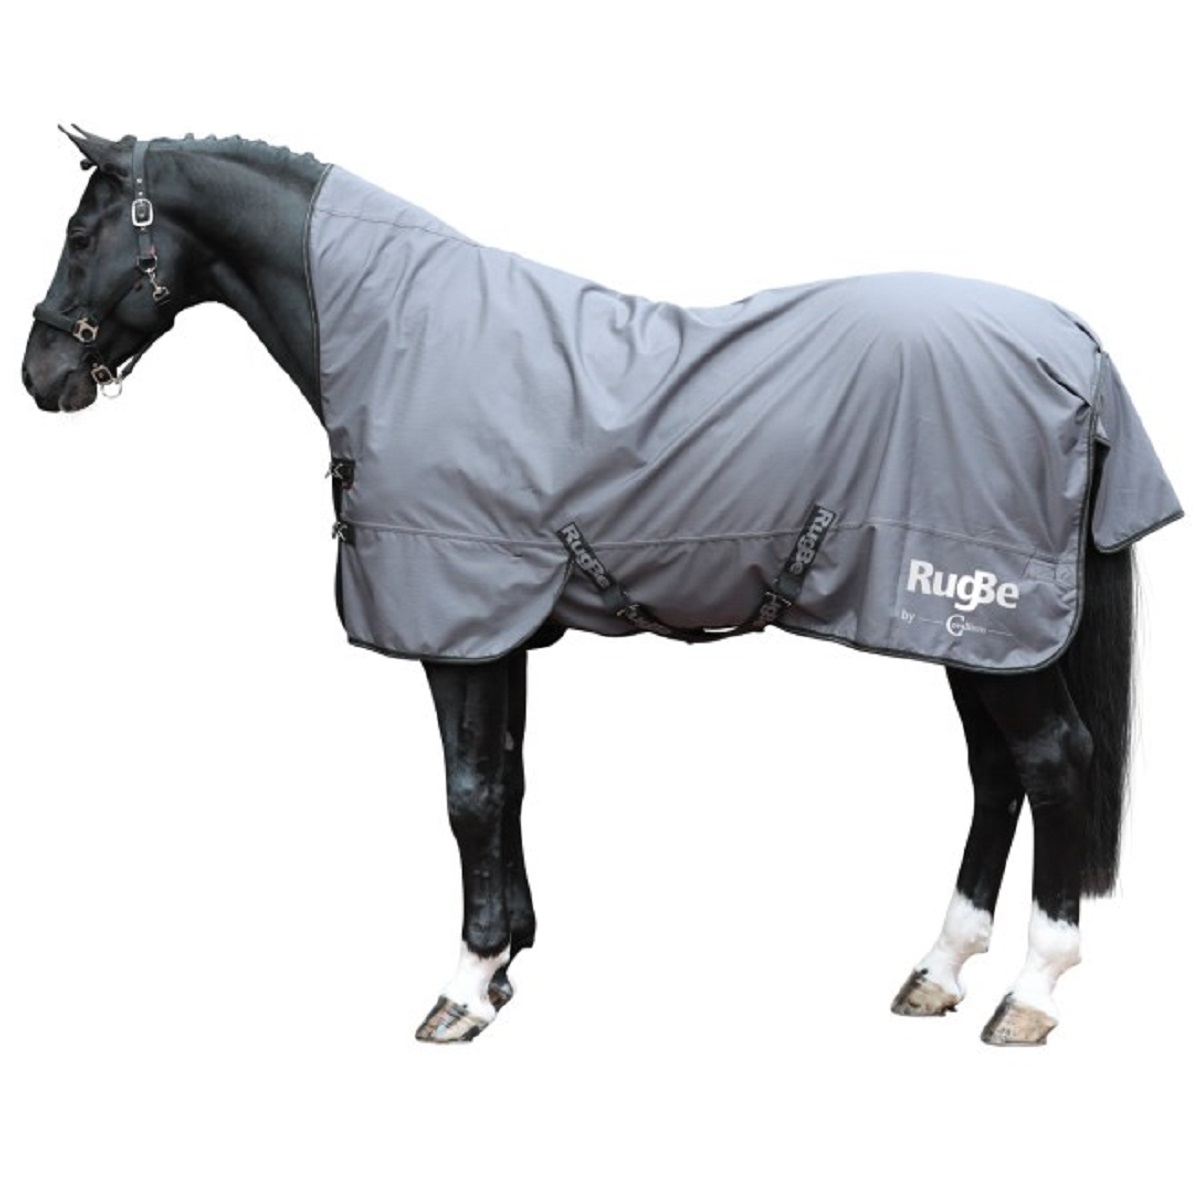 Covalliero Turnout Rug RugBe HighNeck 125